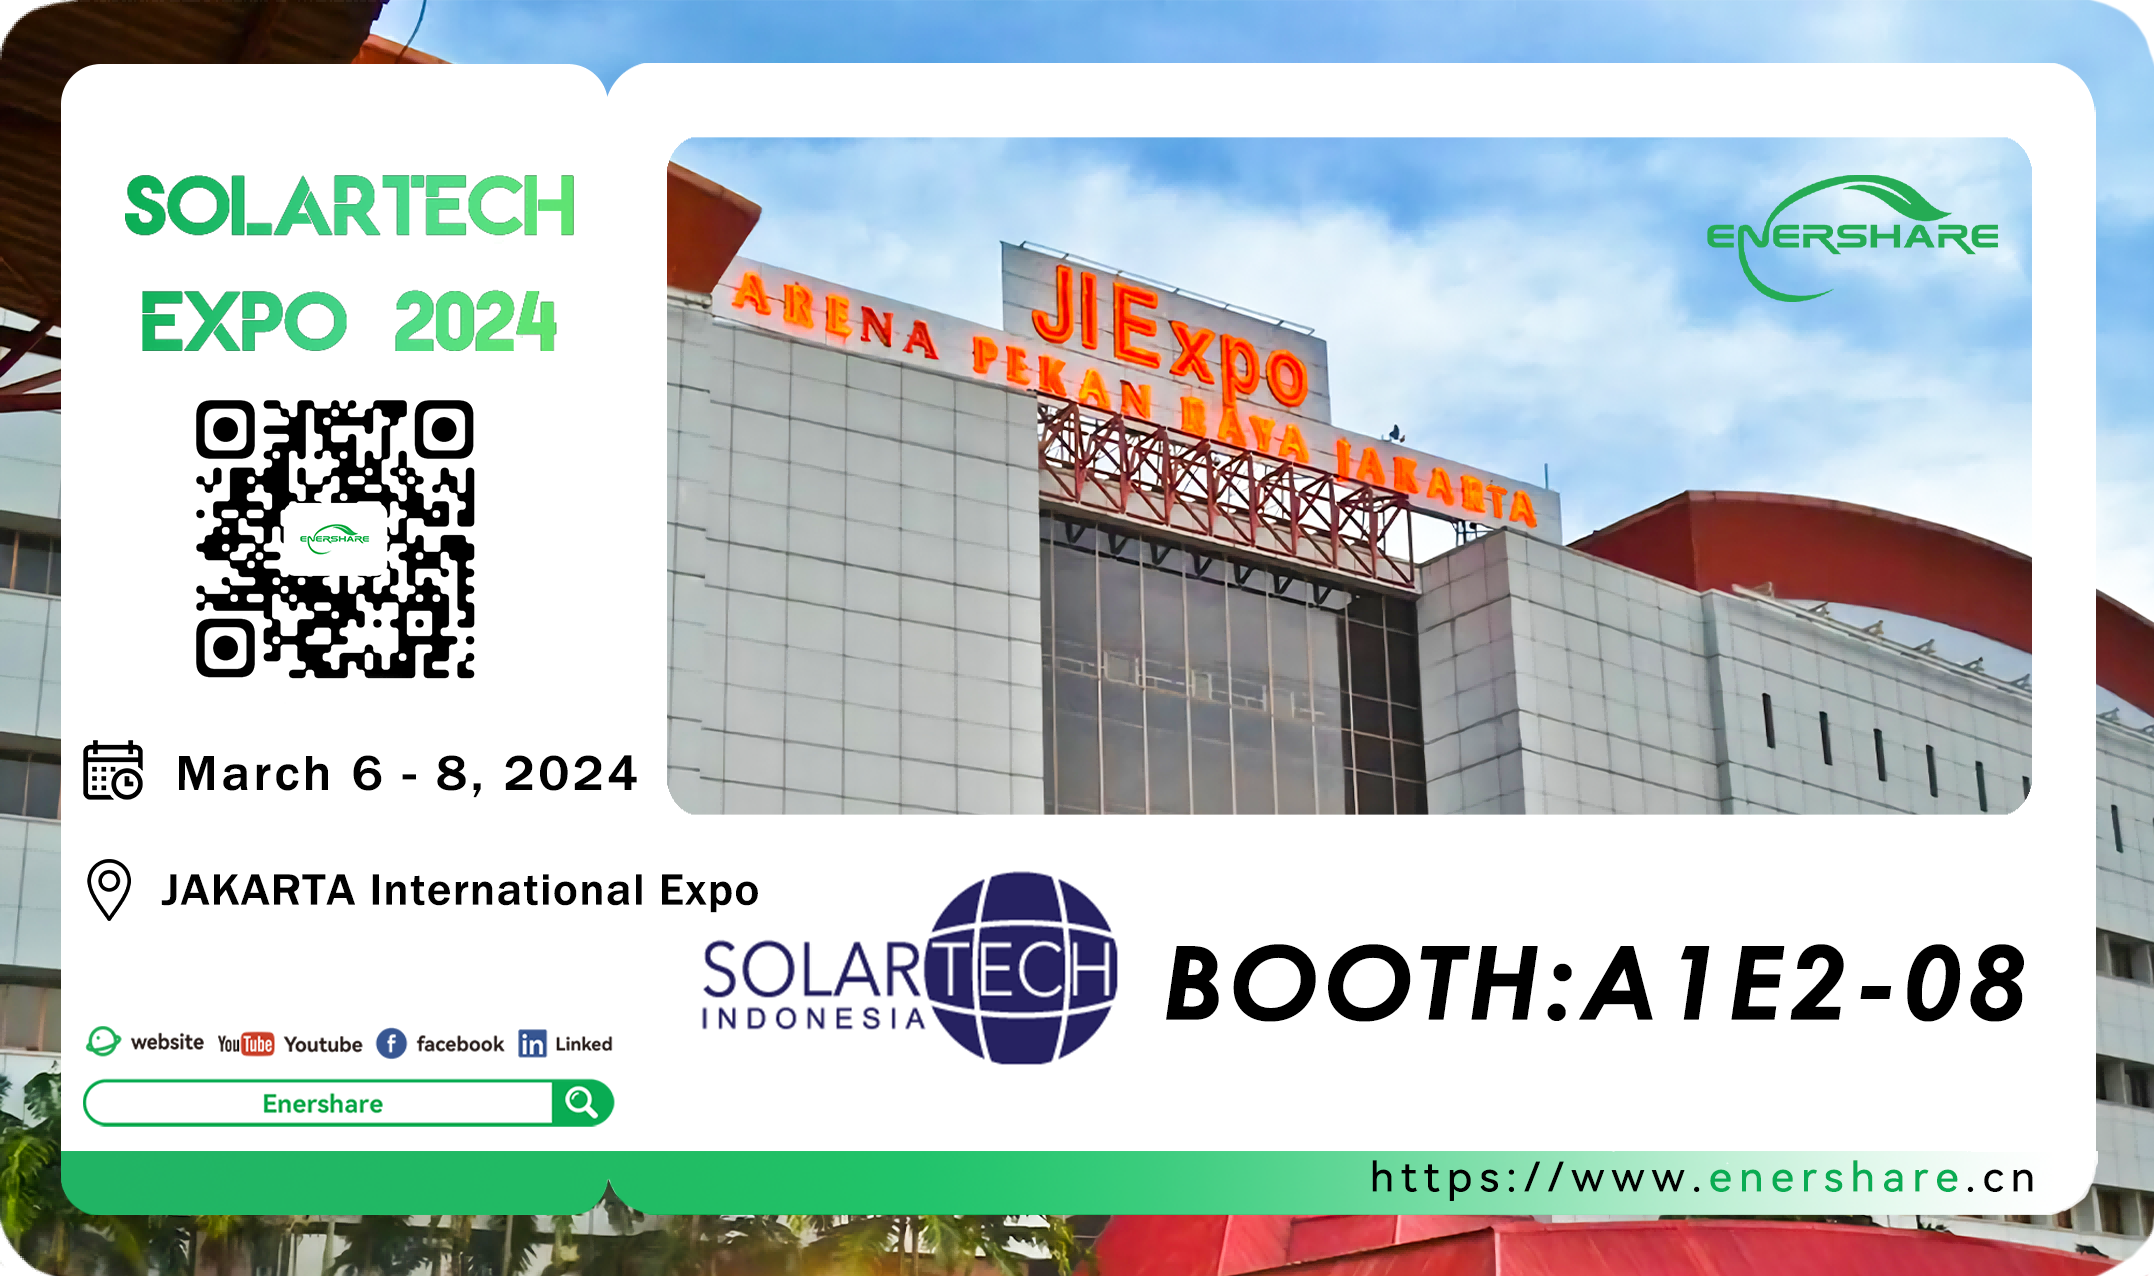 Enershare will appear at the Solartech Indonesia Expo 2024 ！